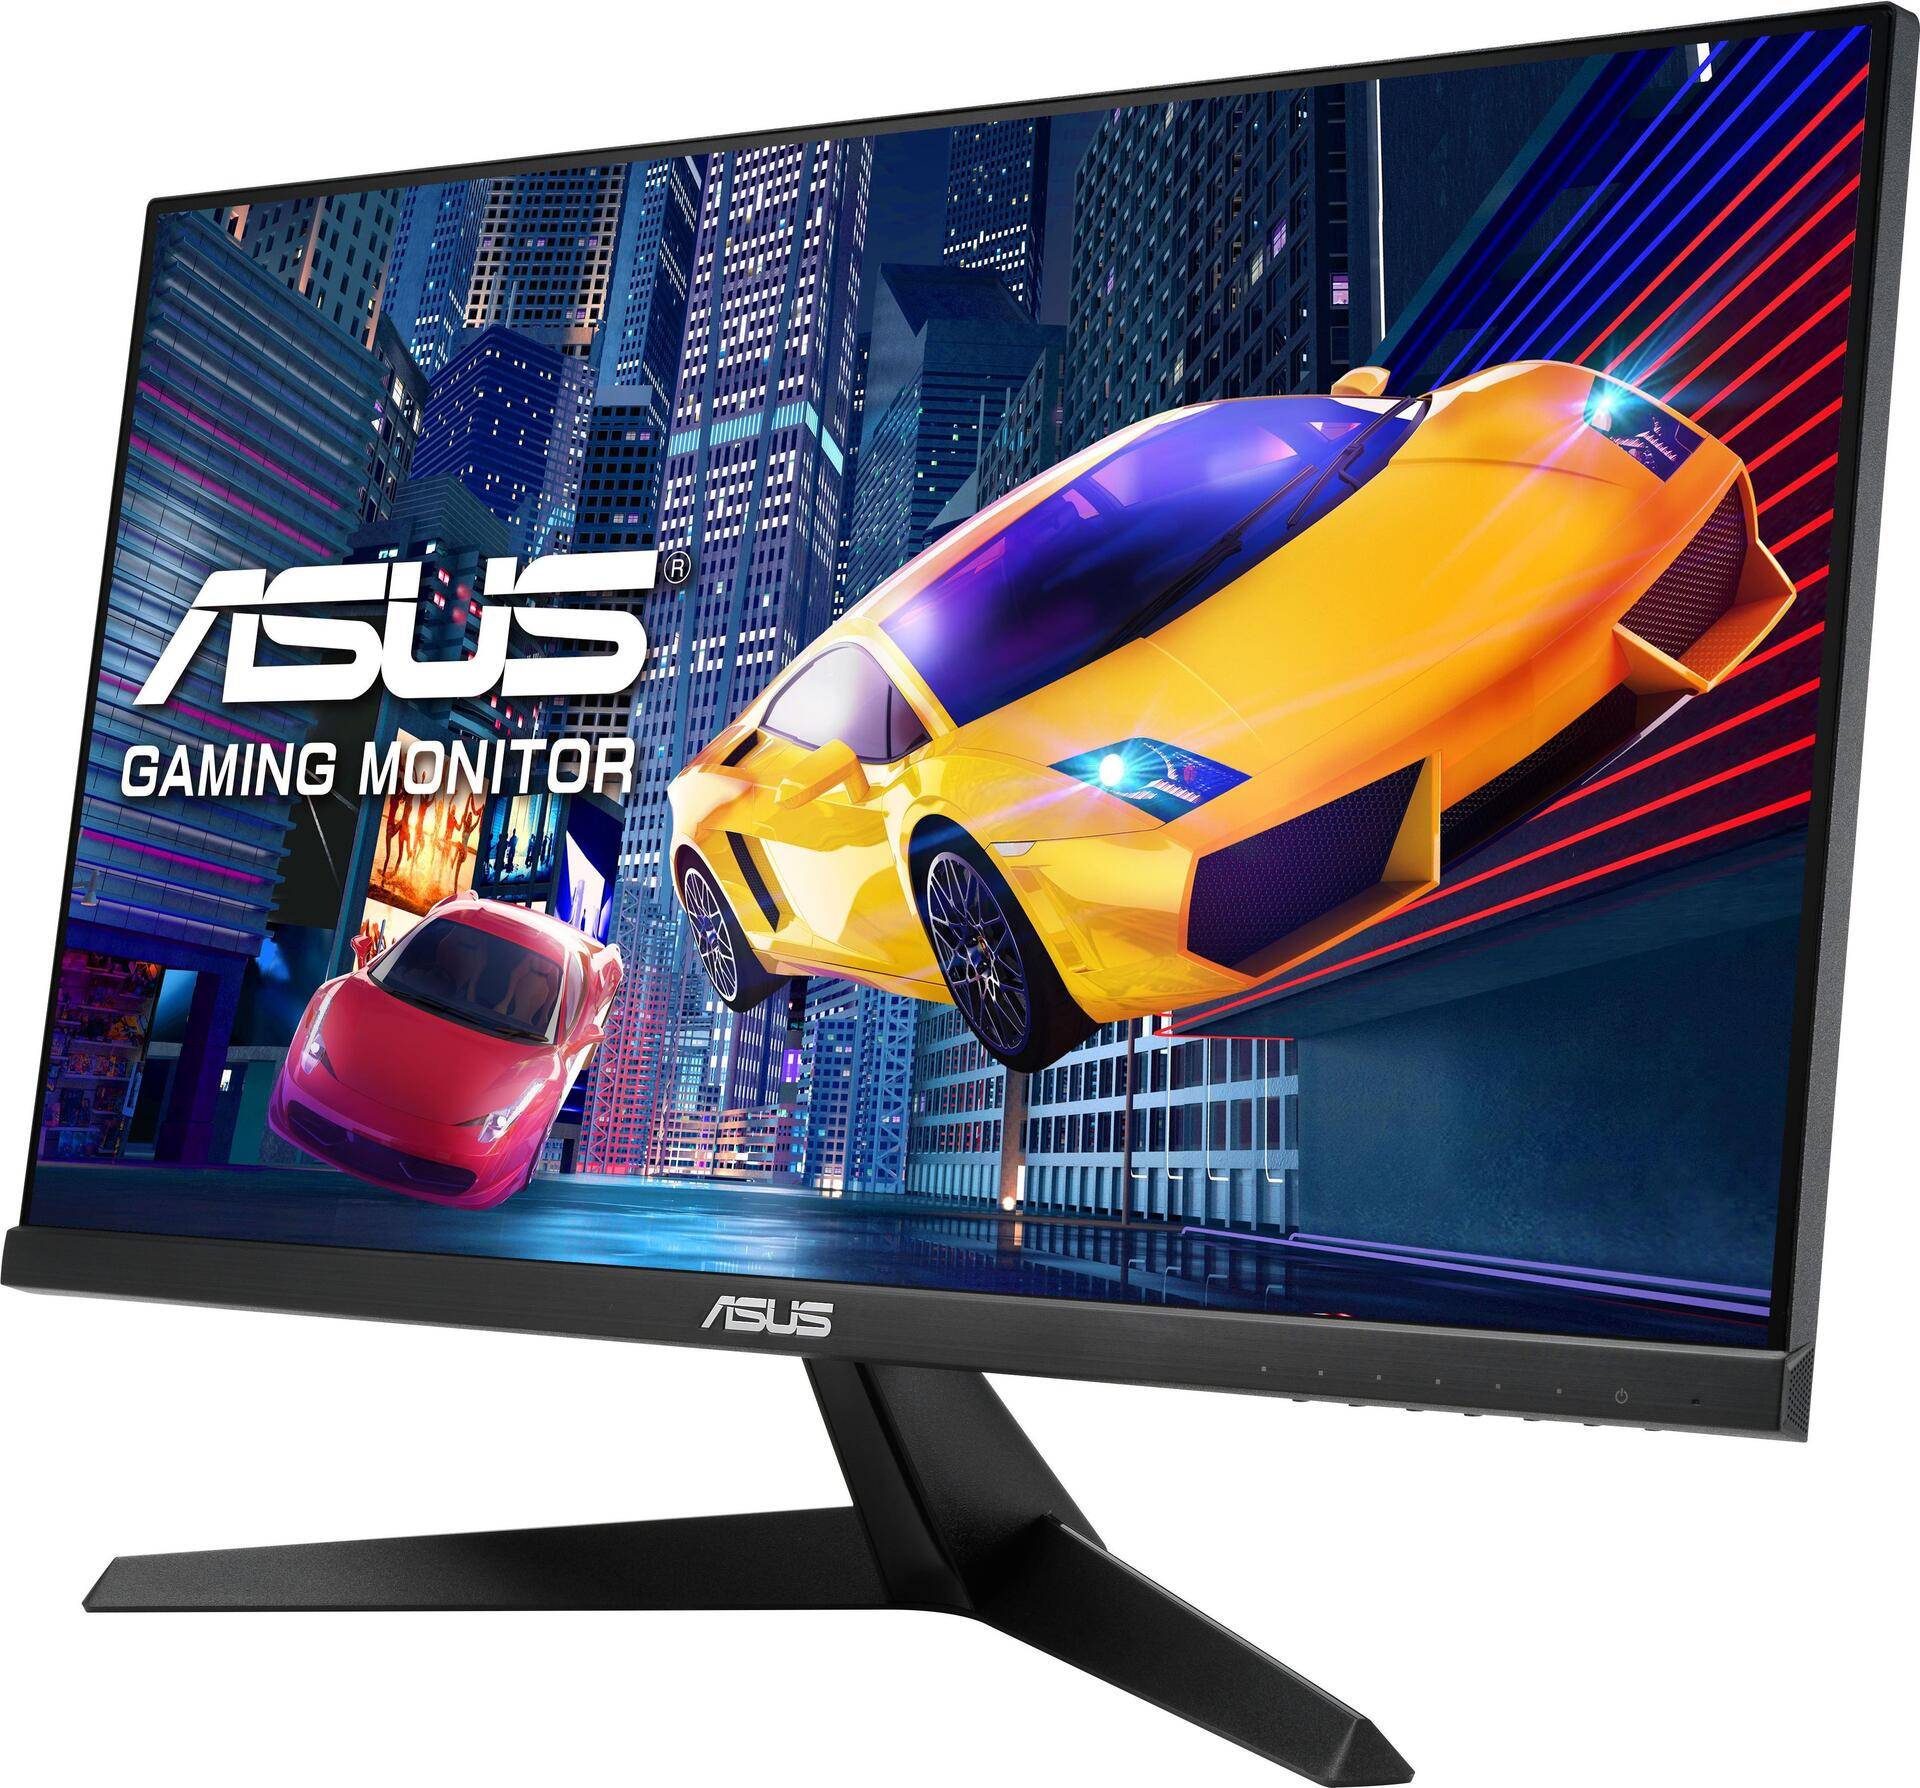 ASUS VY249HE - LED-Monitor - 60.5 cm (23.8") - 1920 x 1080 Full HD (1080p) @ 75 Hz - IPS - 250 cd/m� - 1000:1 - 1 ms - HDMI, VGA von Asus